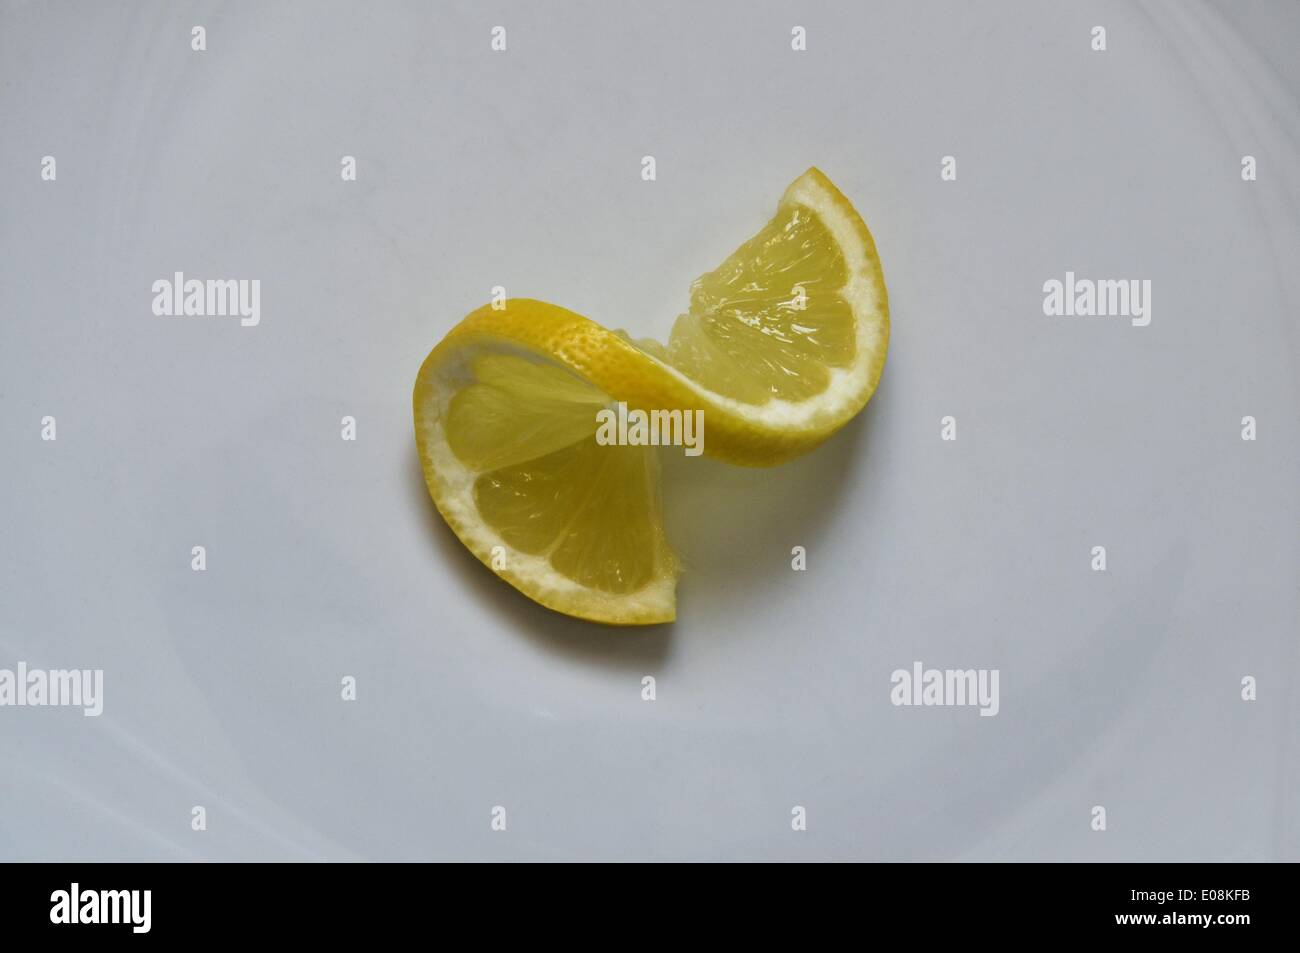 Illustration - A slice of lemon in Germany, 13 January 2013. Photo: Berliner Verlag/Steinach - NO WIRE SERVICE Stock Photo